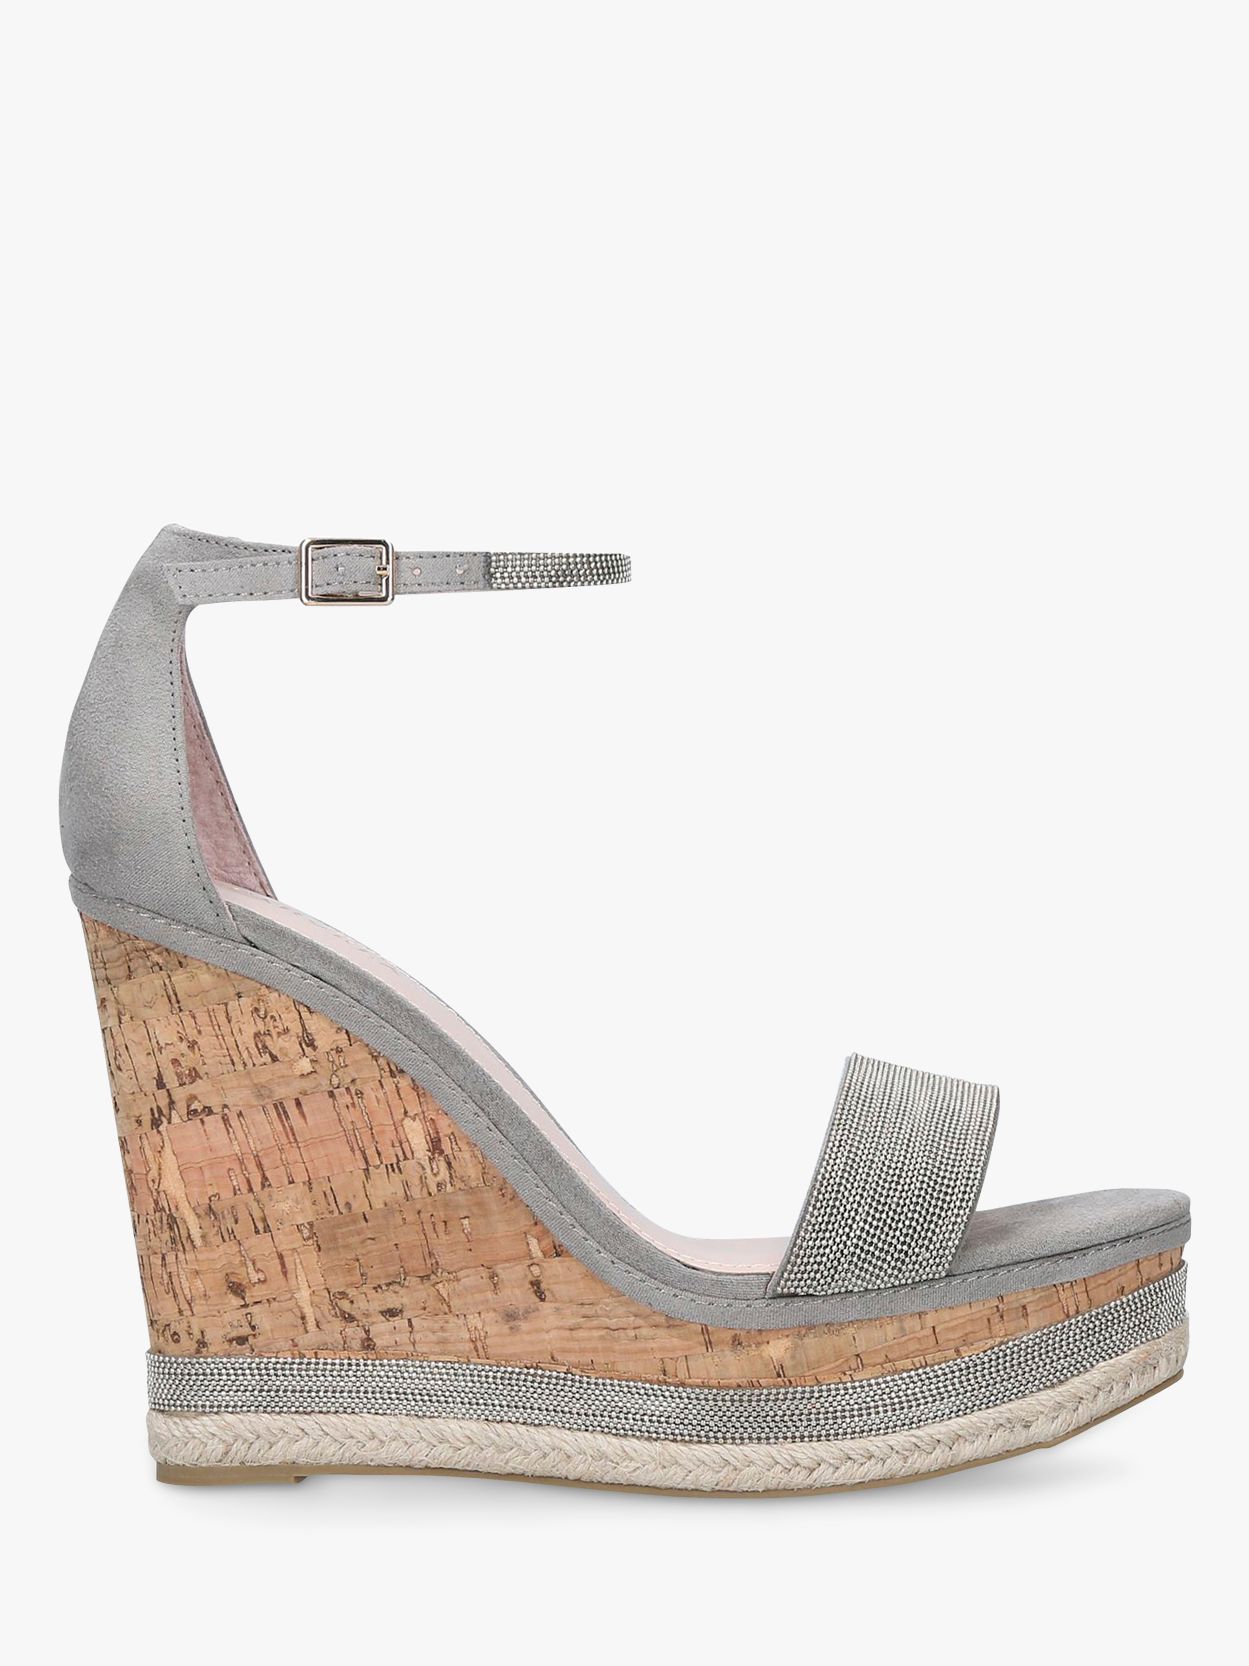 grey wedge shoes